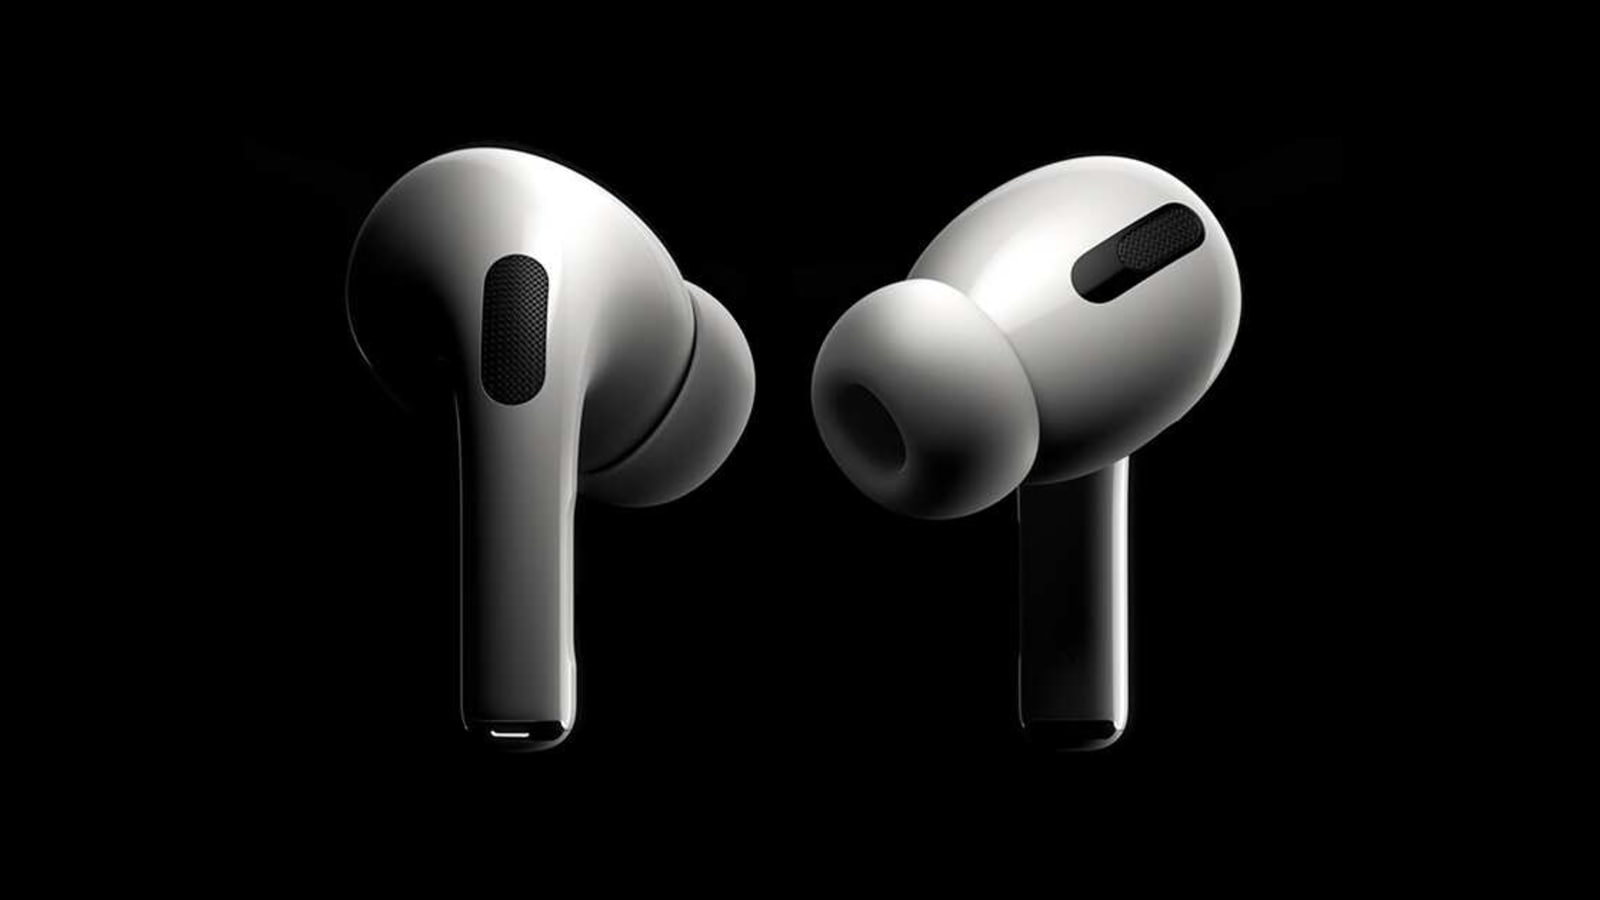 Apples Upcoming Airpods Pro 2 Will Come In Two Sizes Wearables News